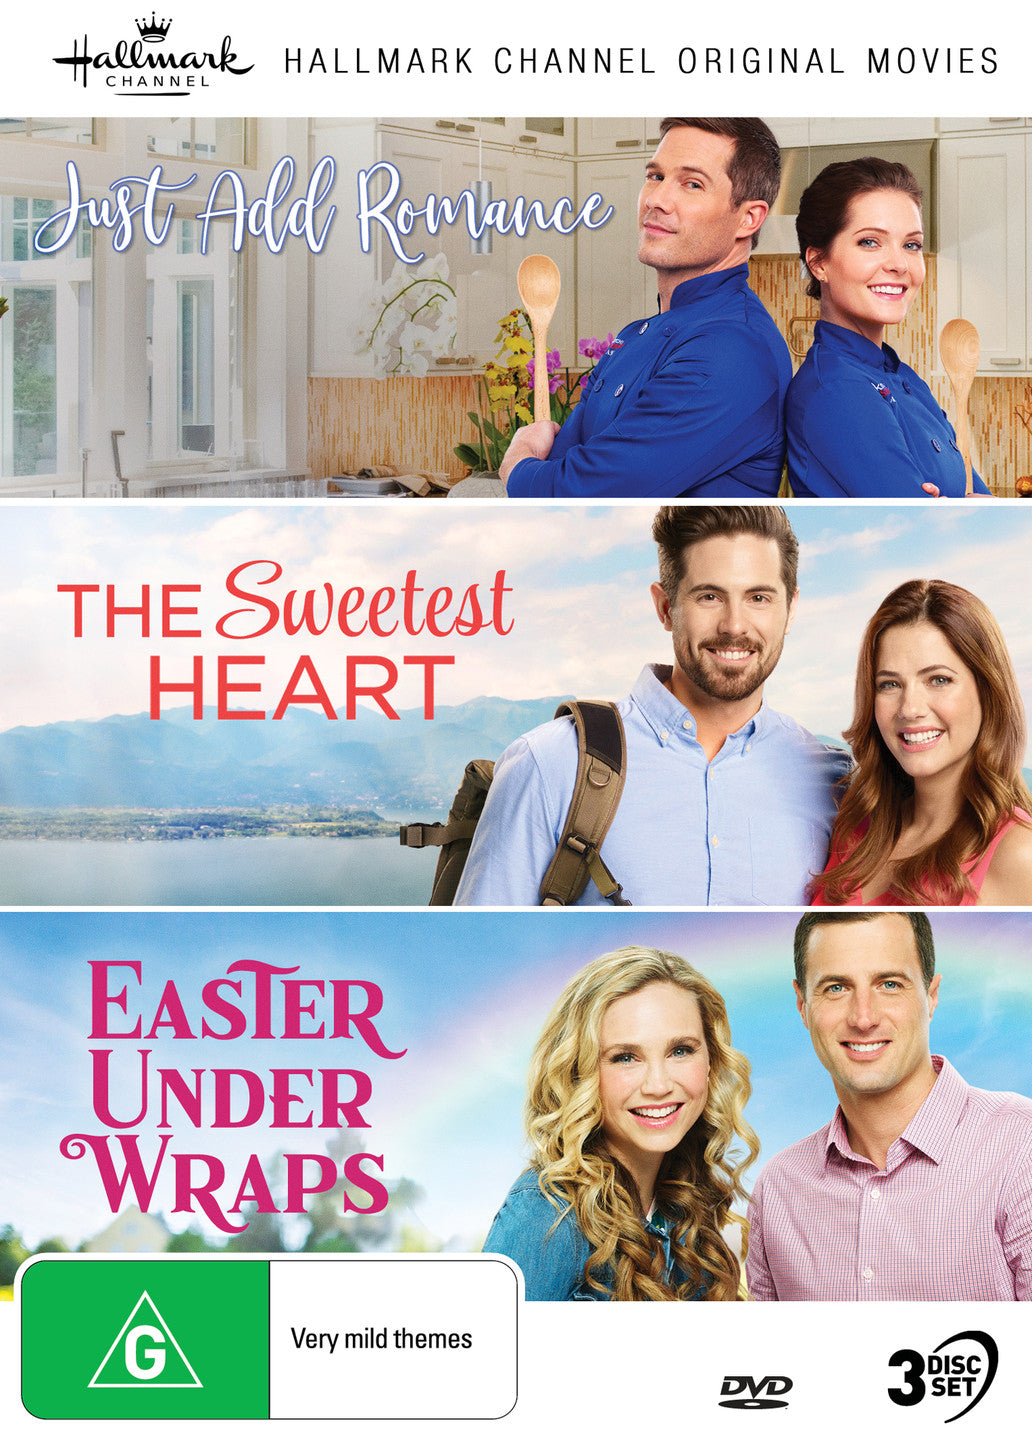 HALLMARK COLLECTION 10: JUST ADD ROMANCE, SWEETEST HEART, EASTER UNDER WRAPS